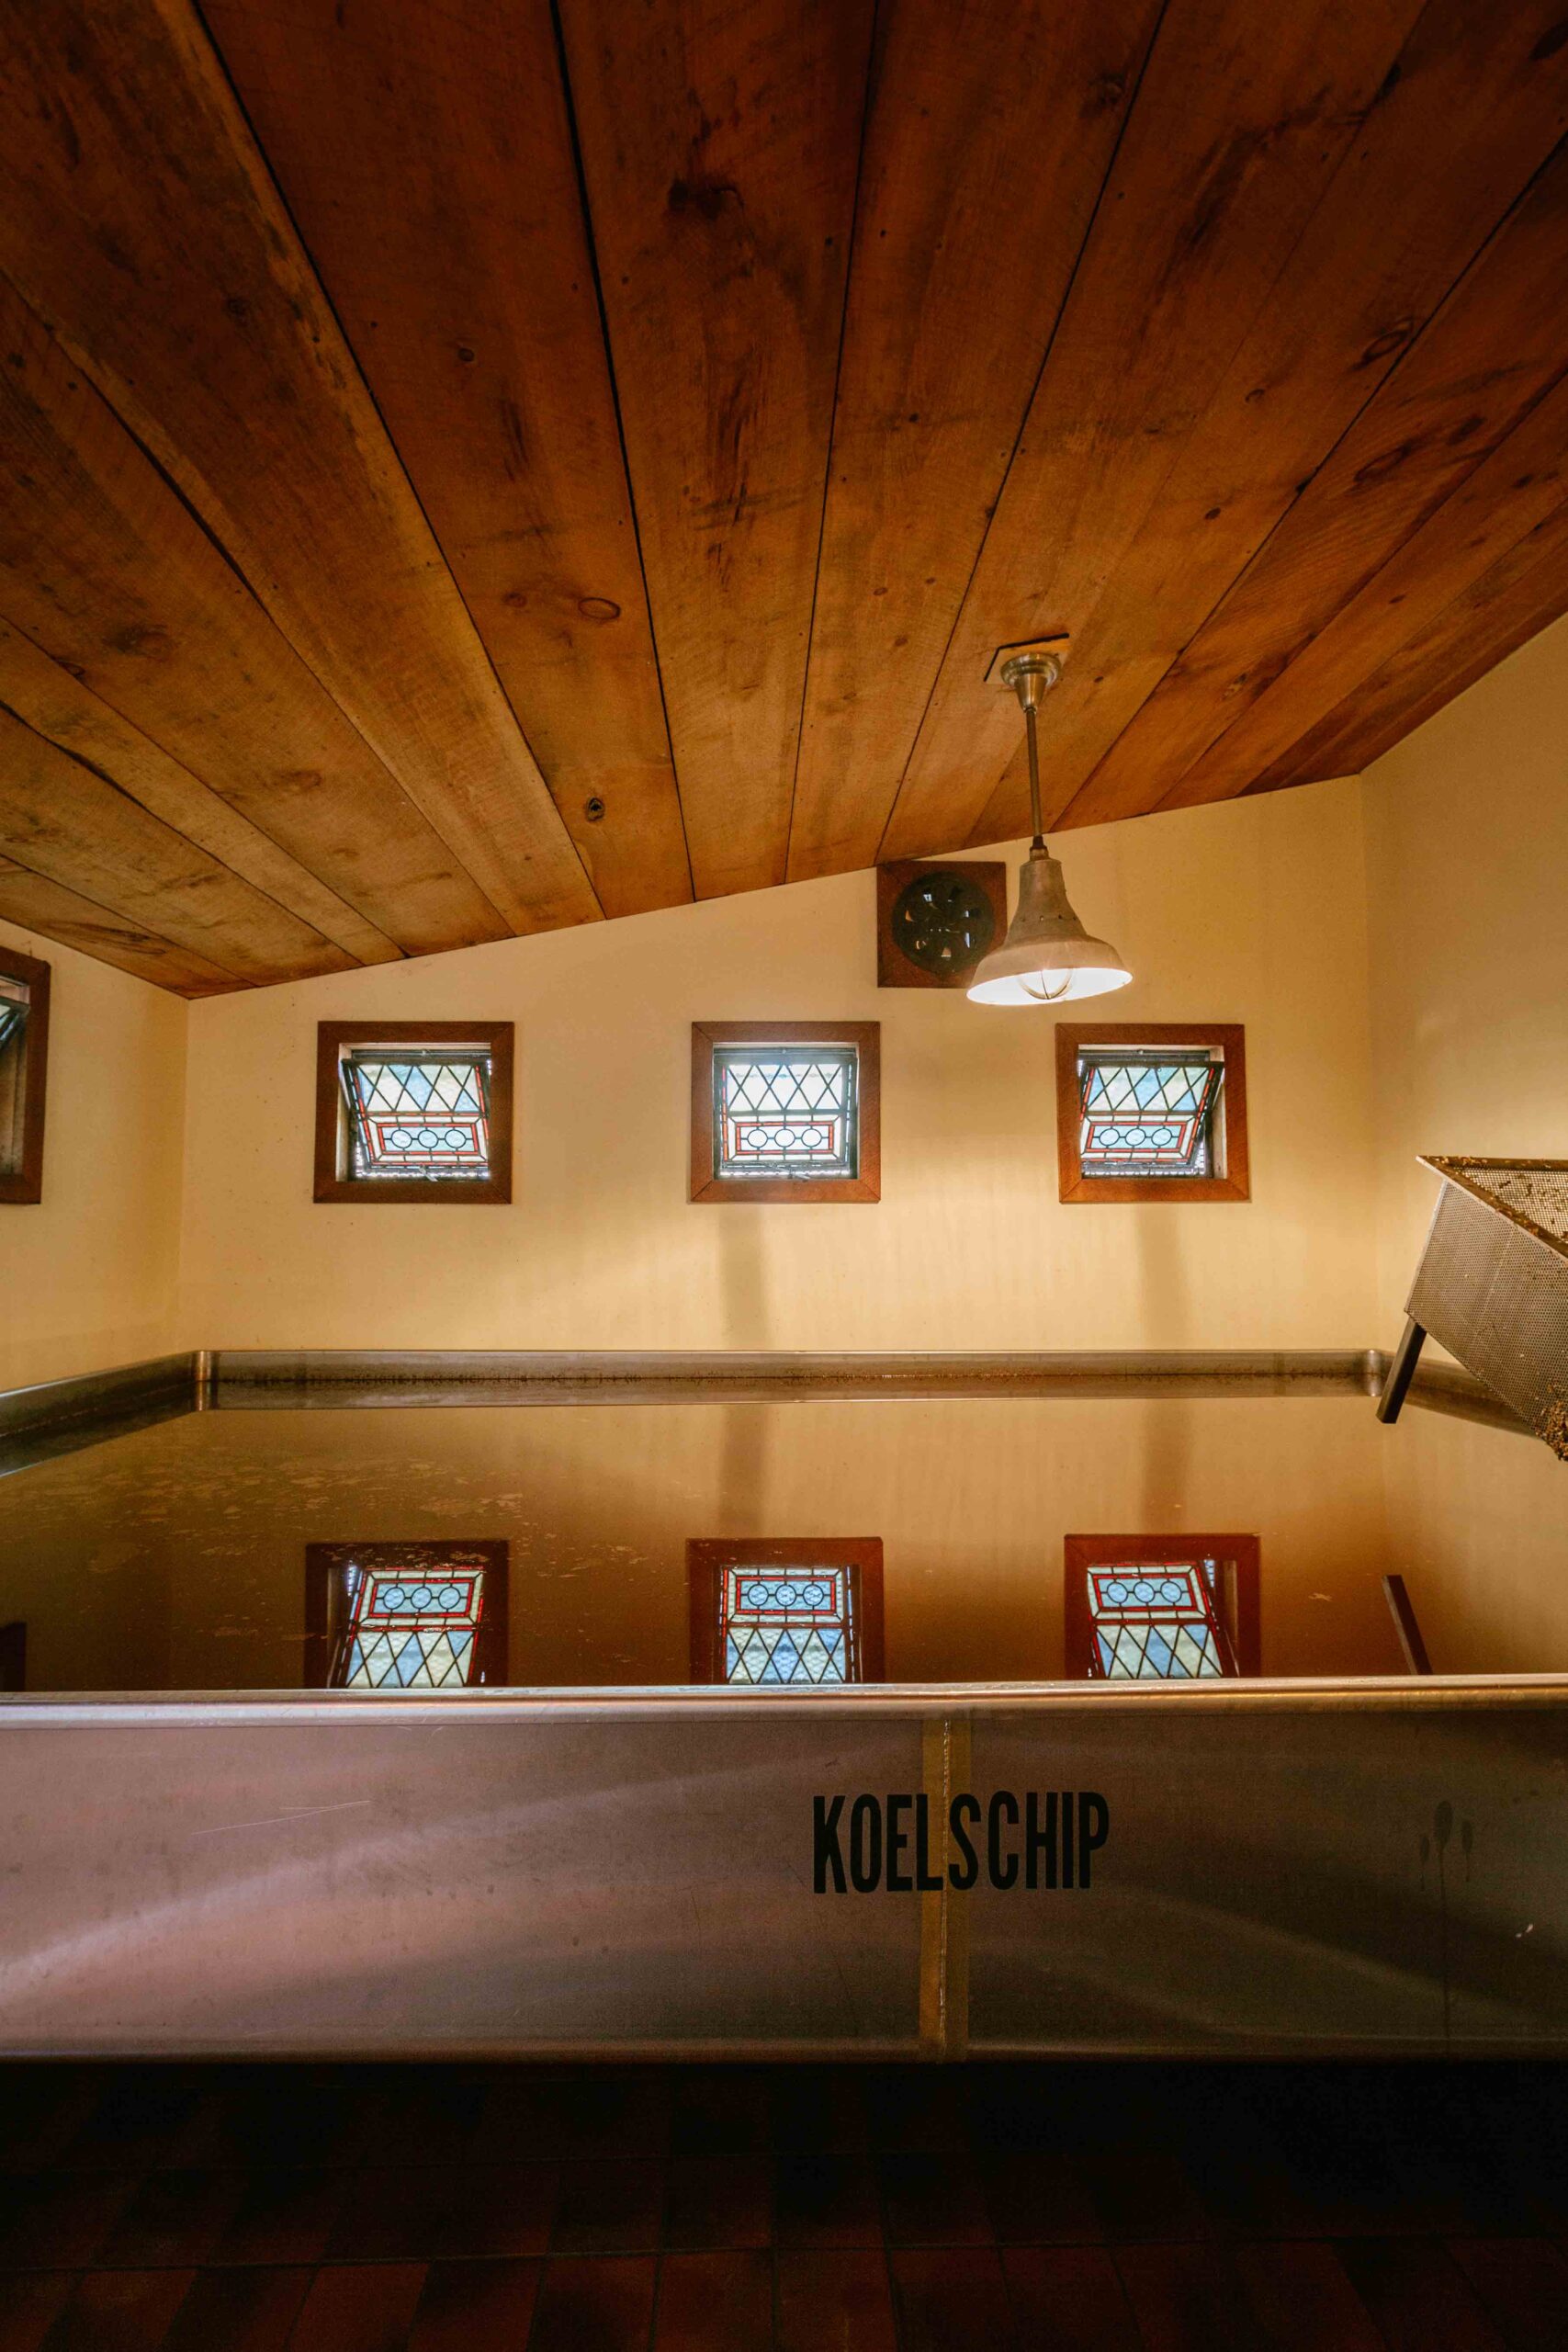 What is a Coolship?